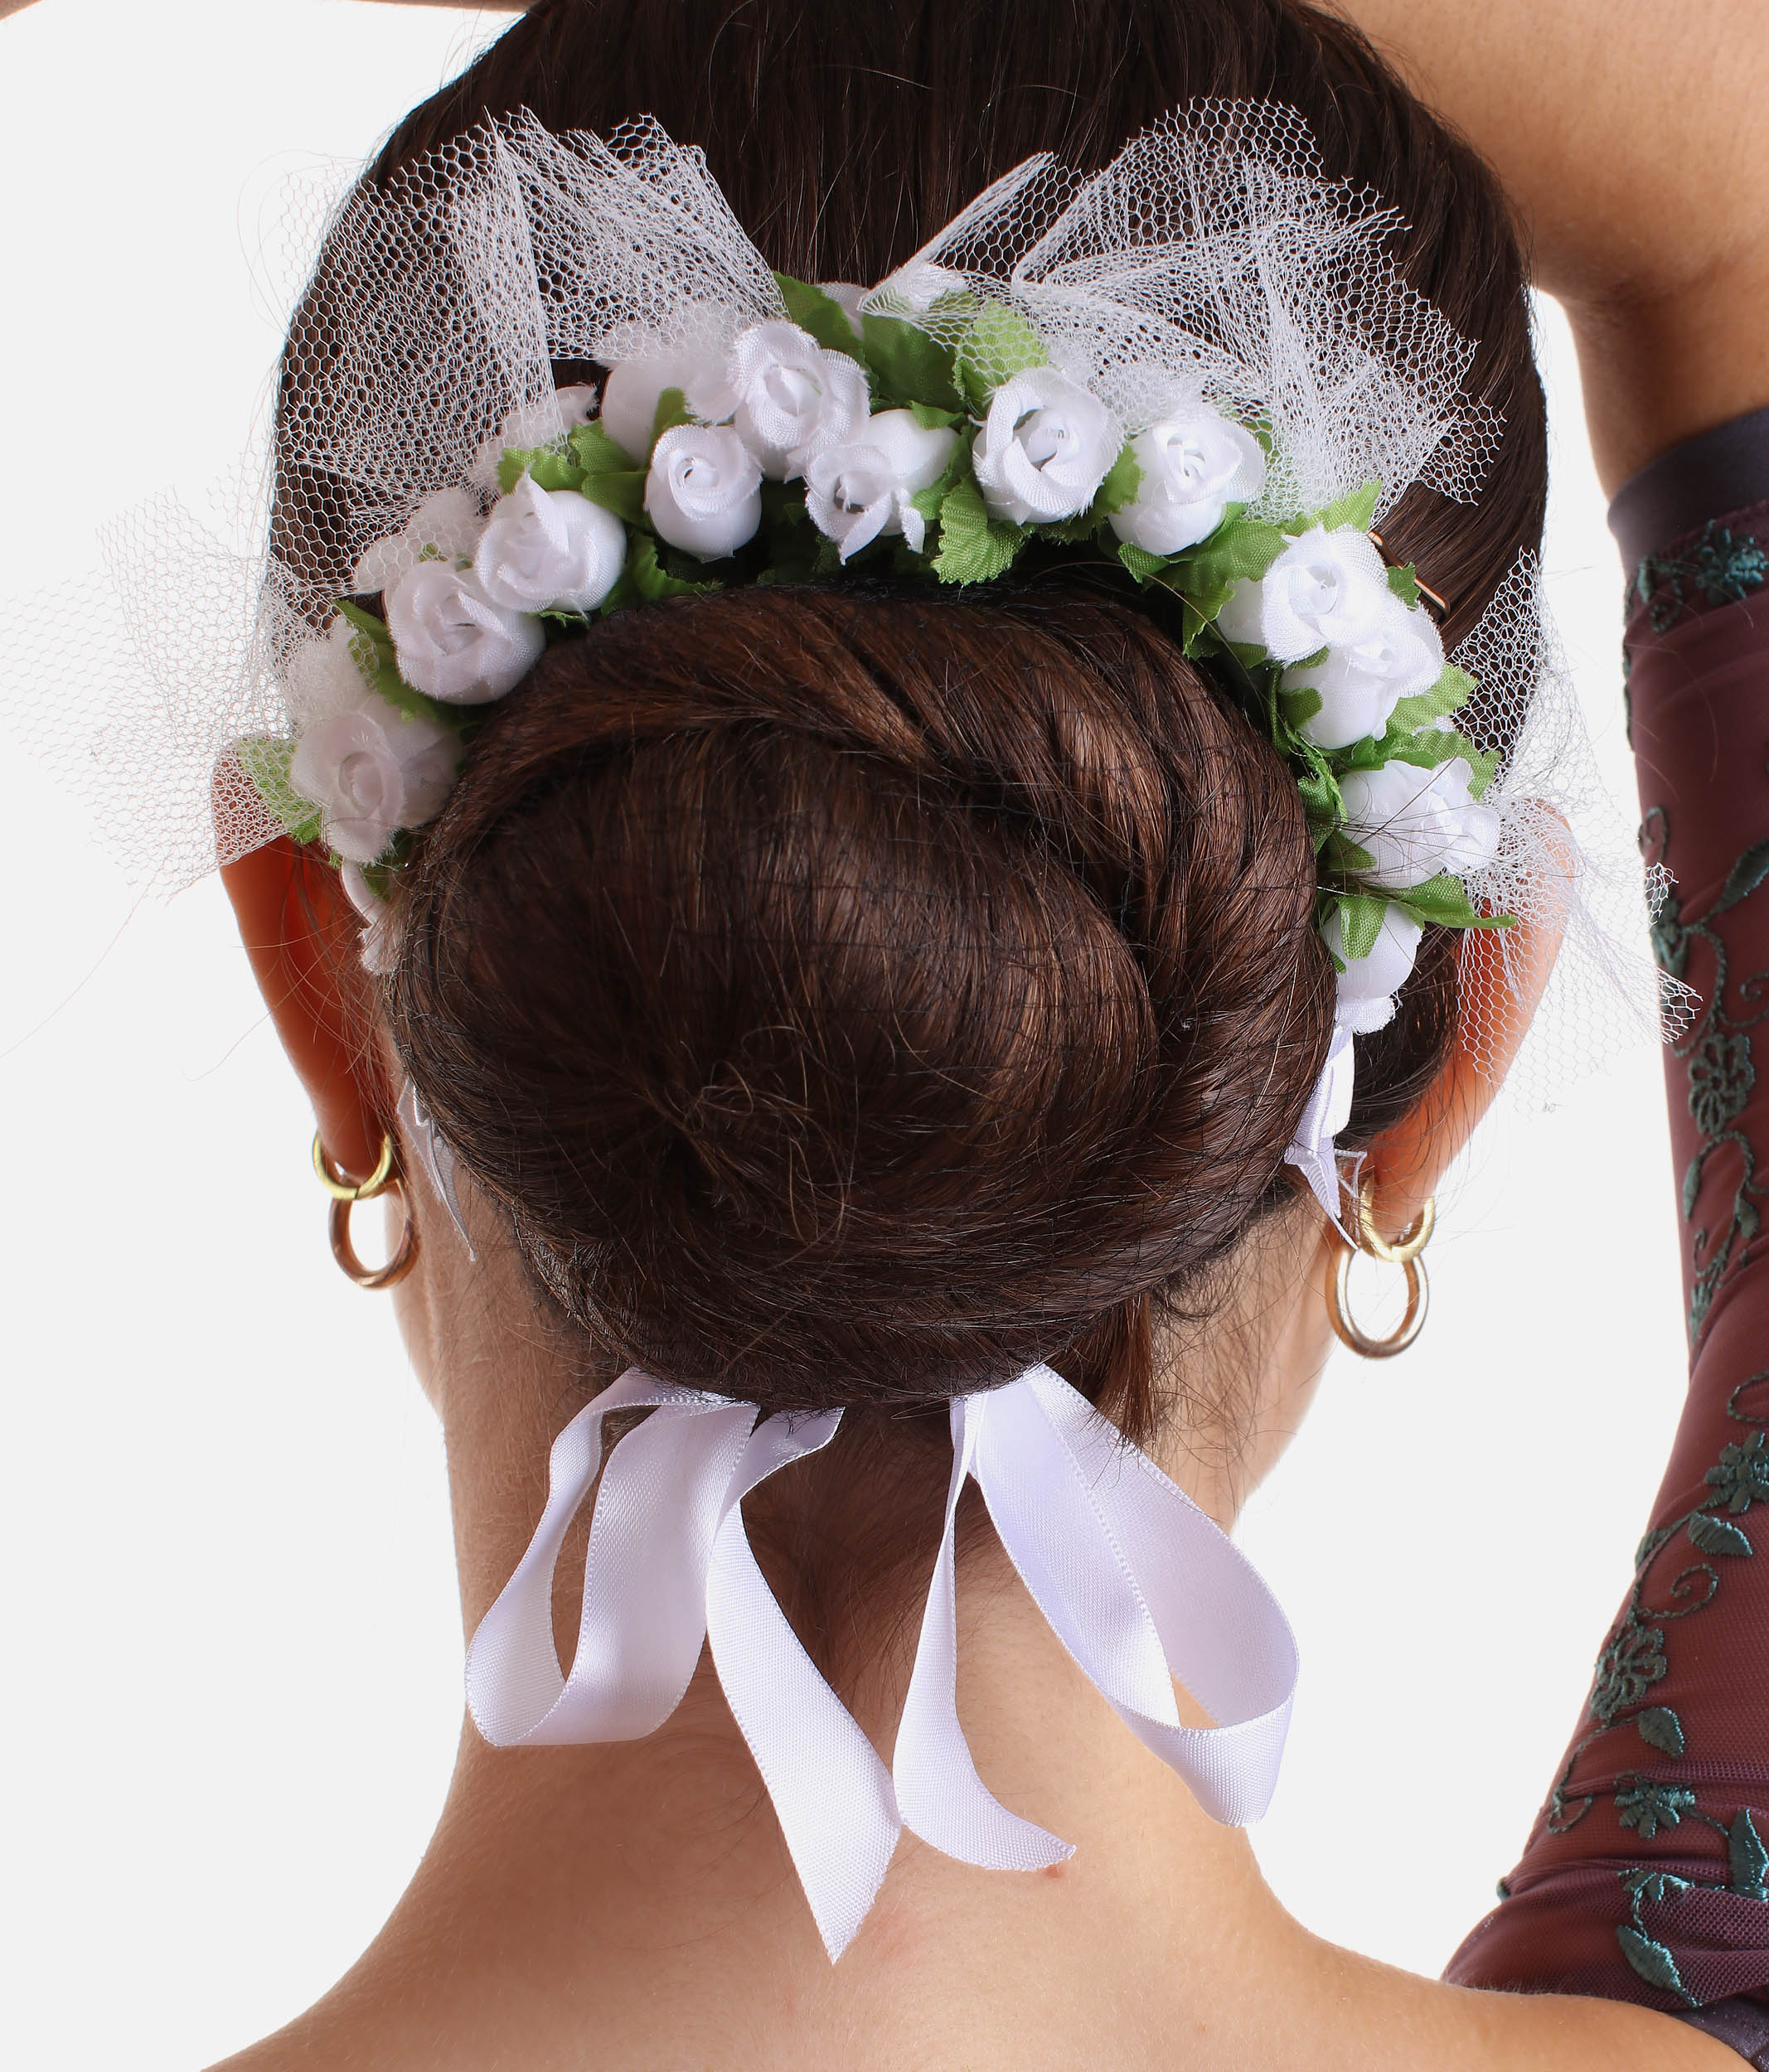 Hair Floral Accessory - 5613